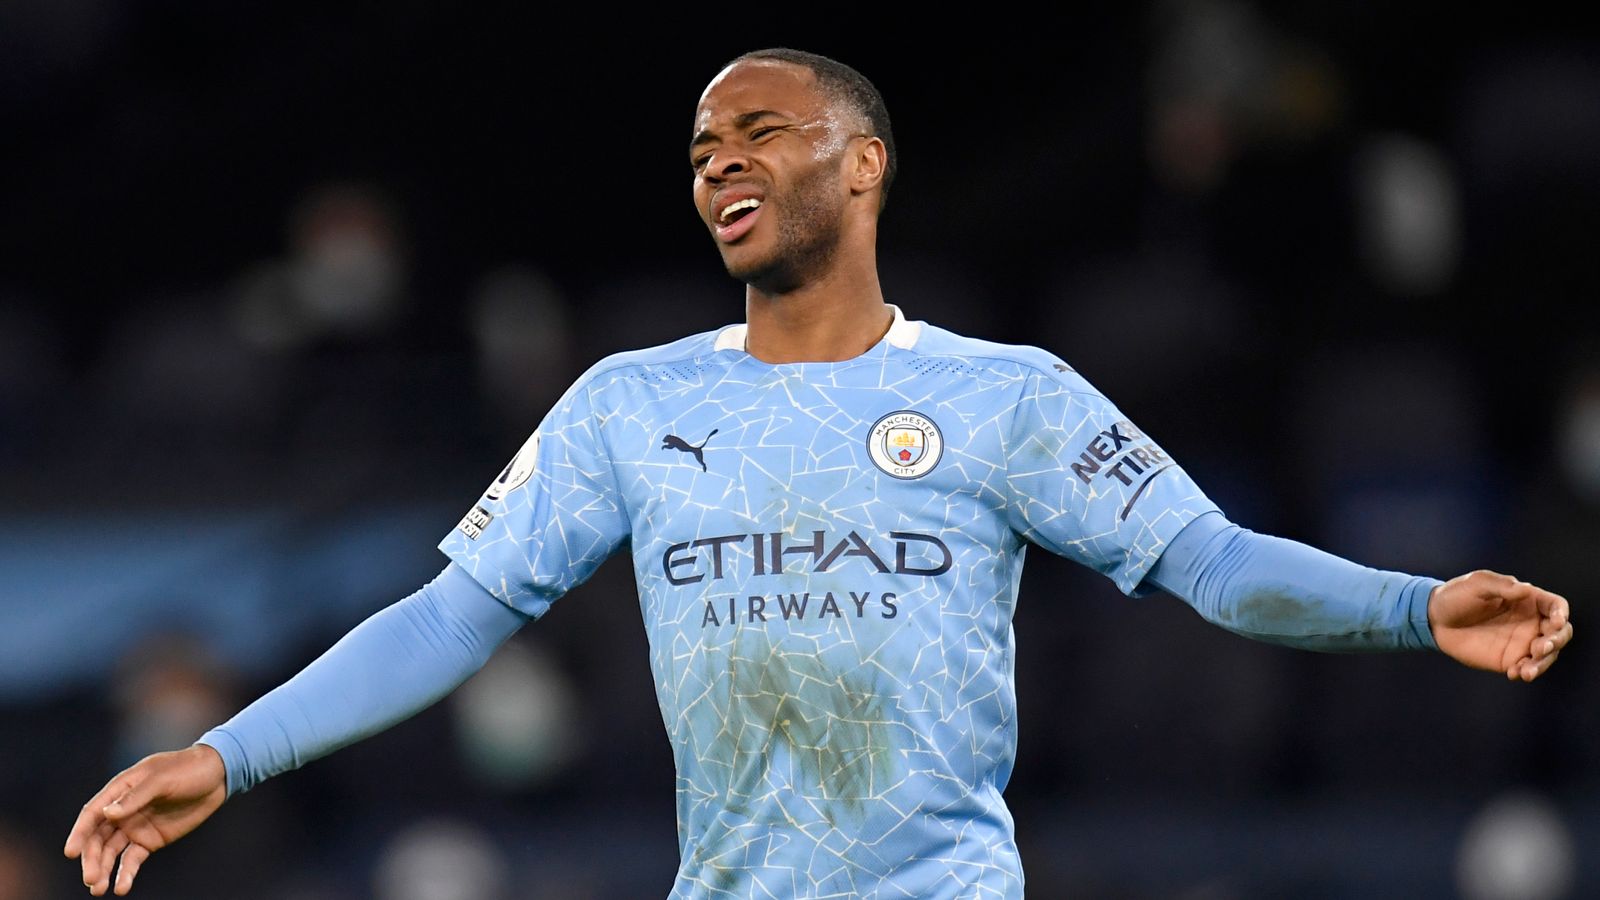 Raheem Sterling and Manchester City to resume contract discussions amid interest from Barcelona, PSG, and Real Madrid